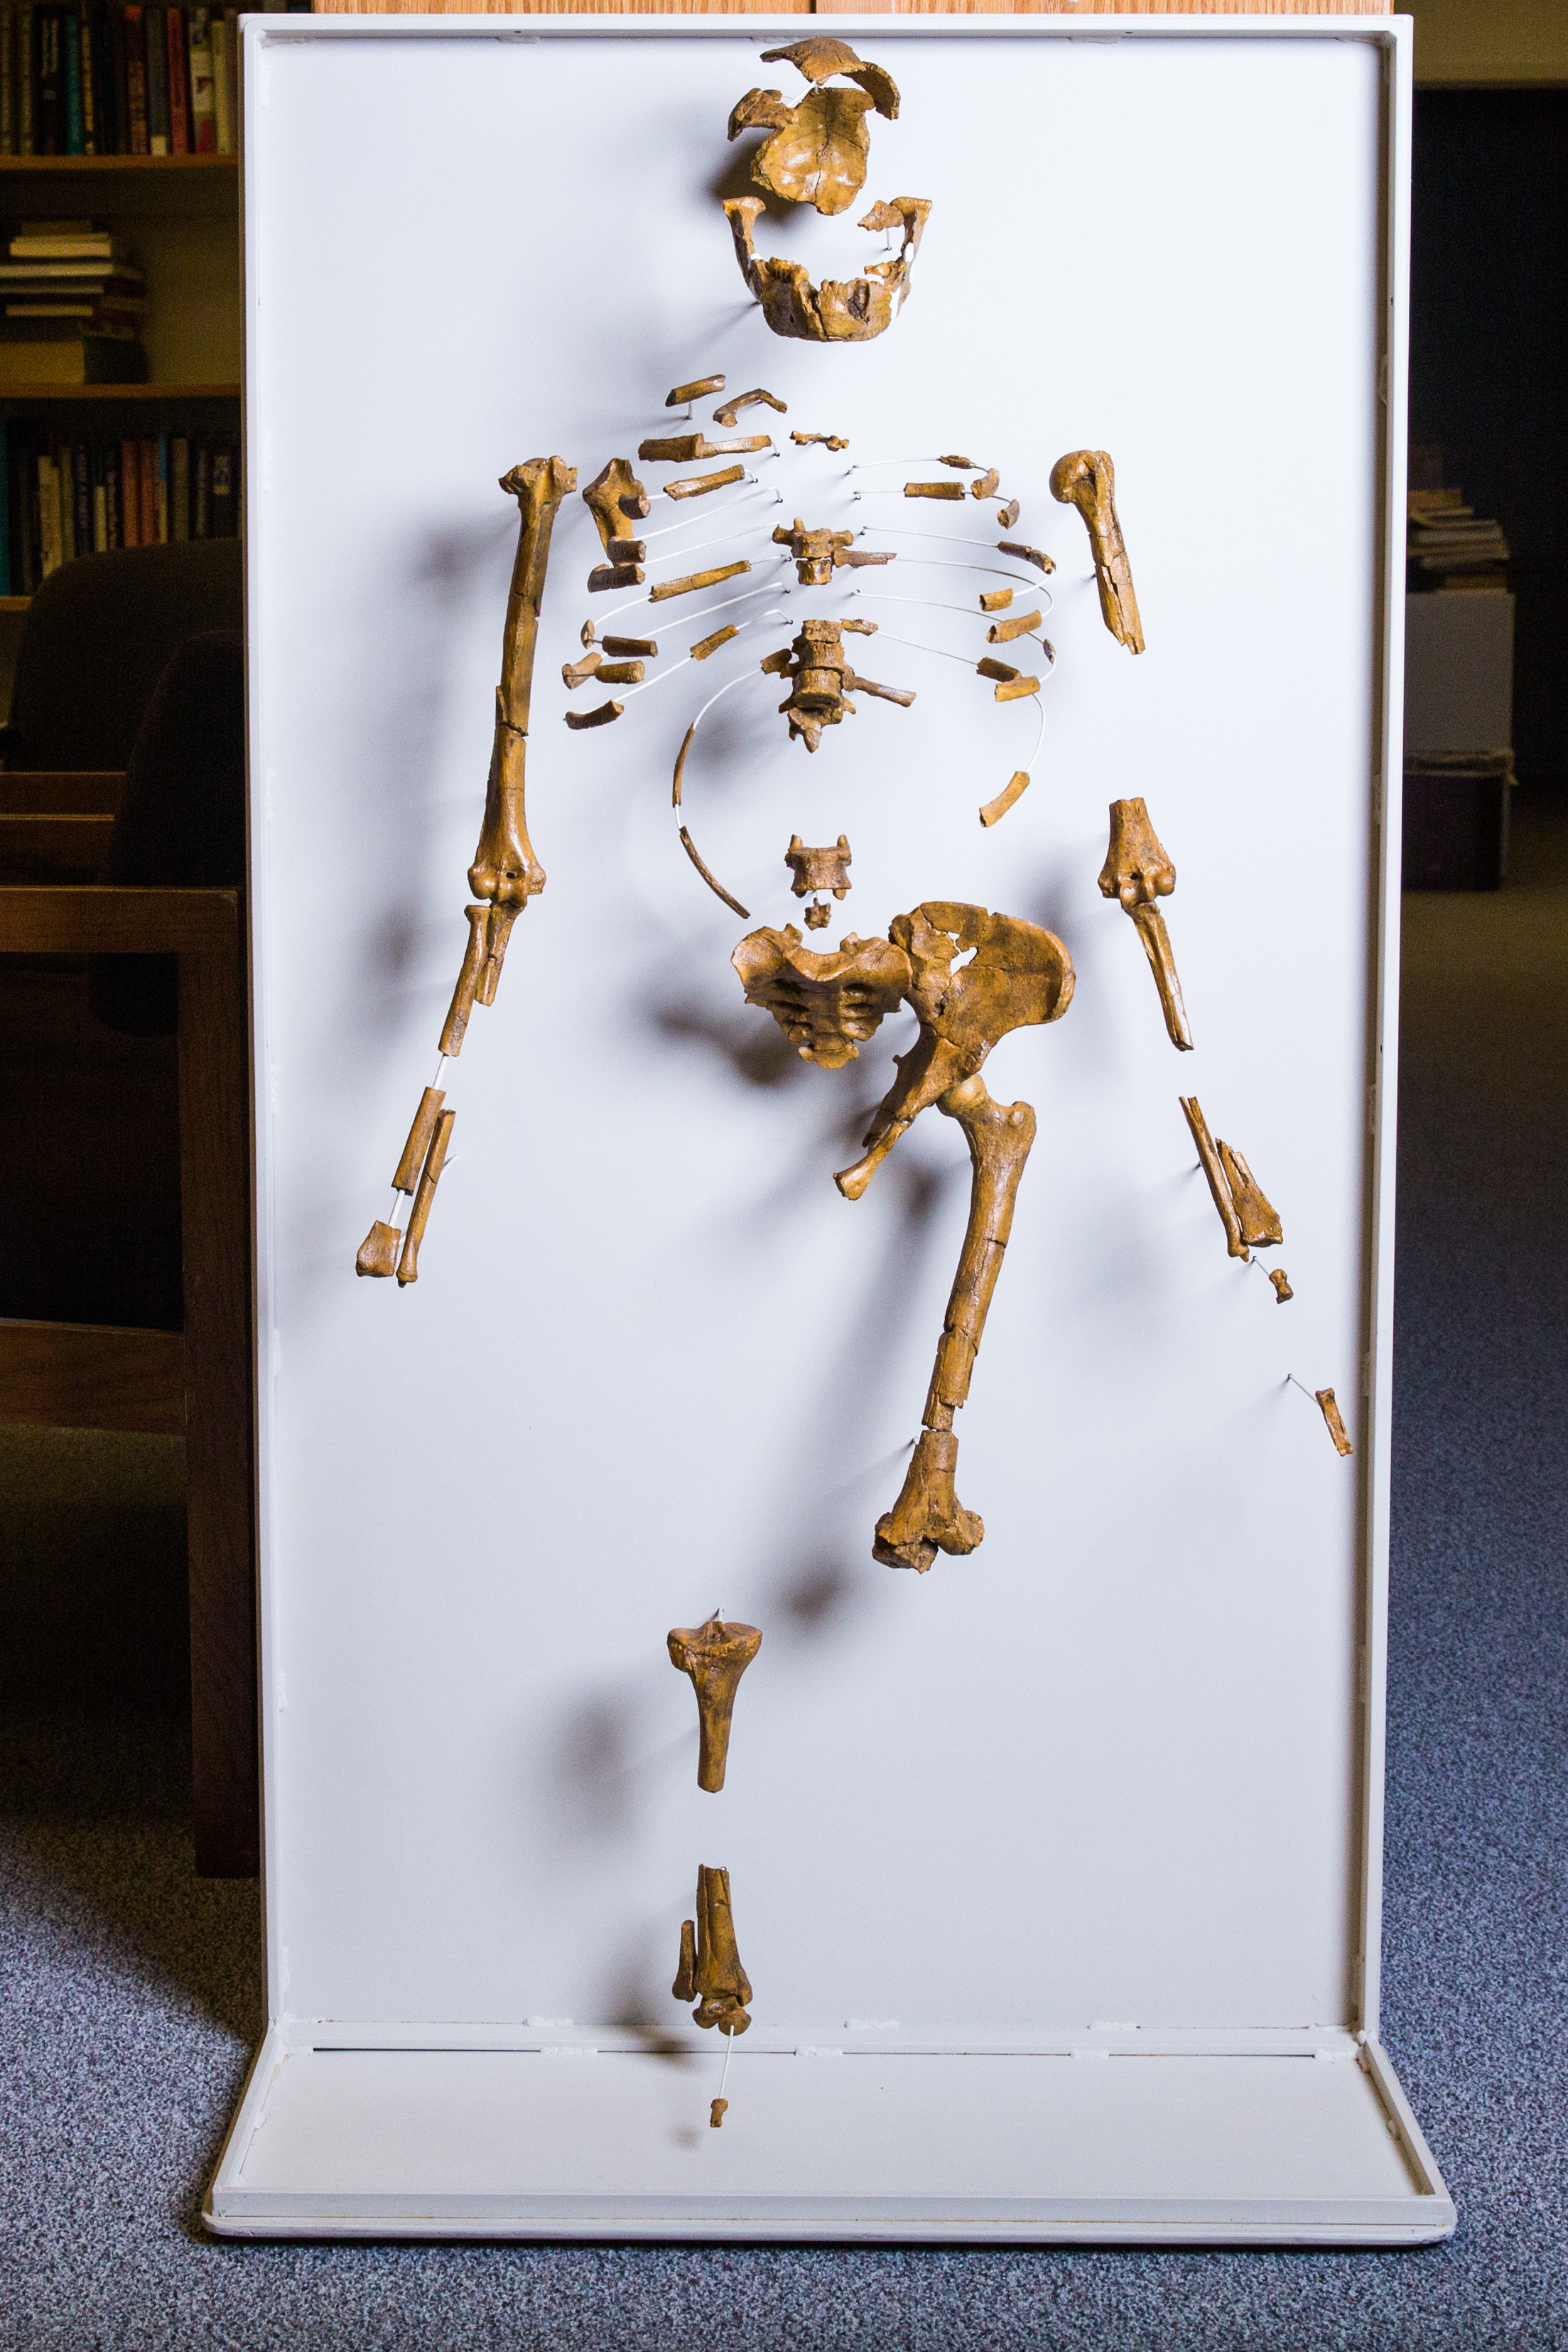 A cast of the Lucy skeleton on the ASU campus